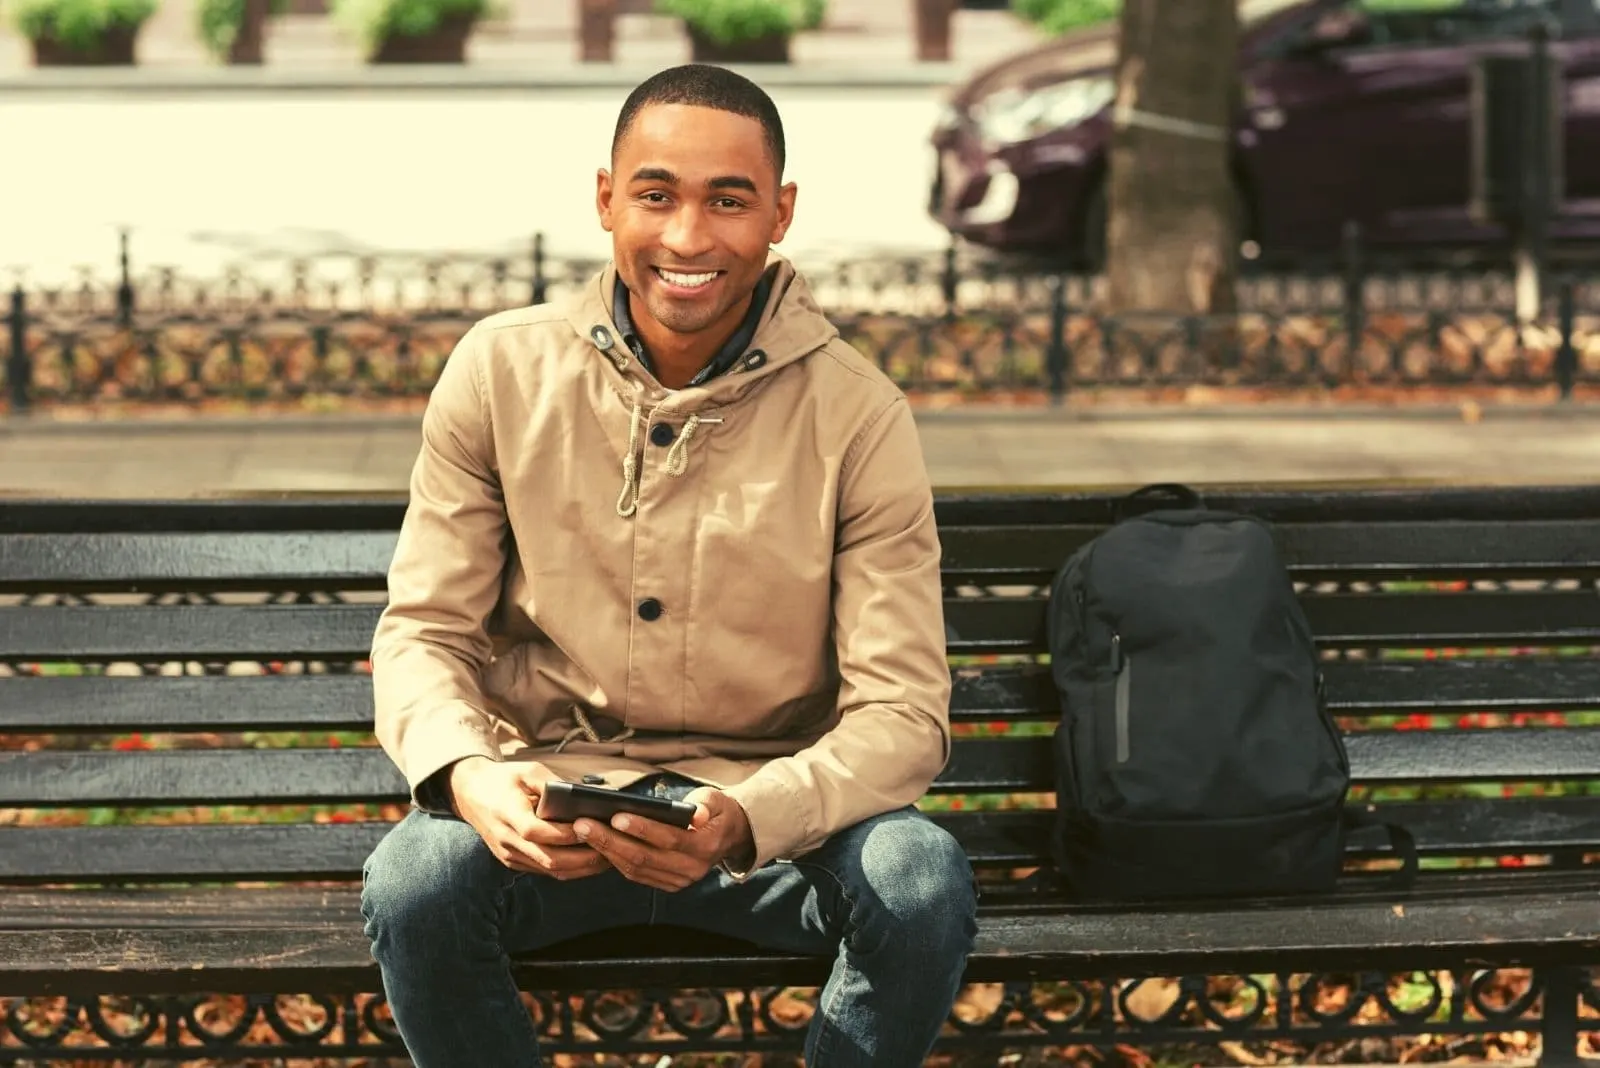 young smiling man using his tablet while sitting in the bench of the park and his bag beside him